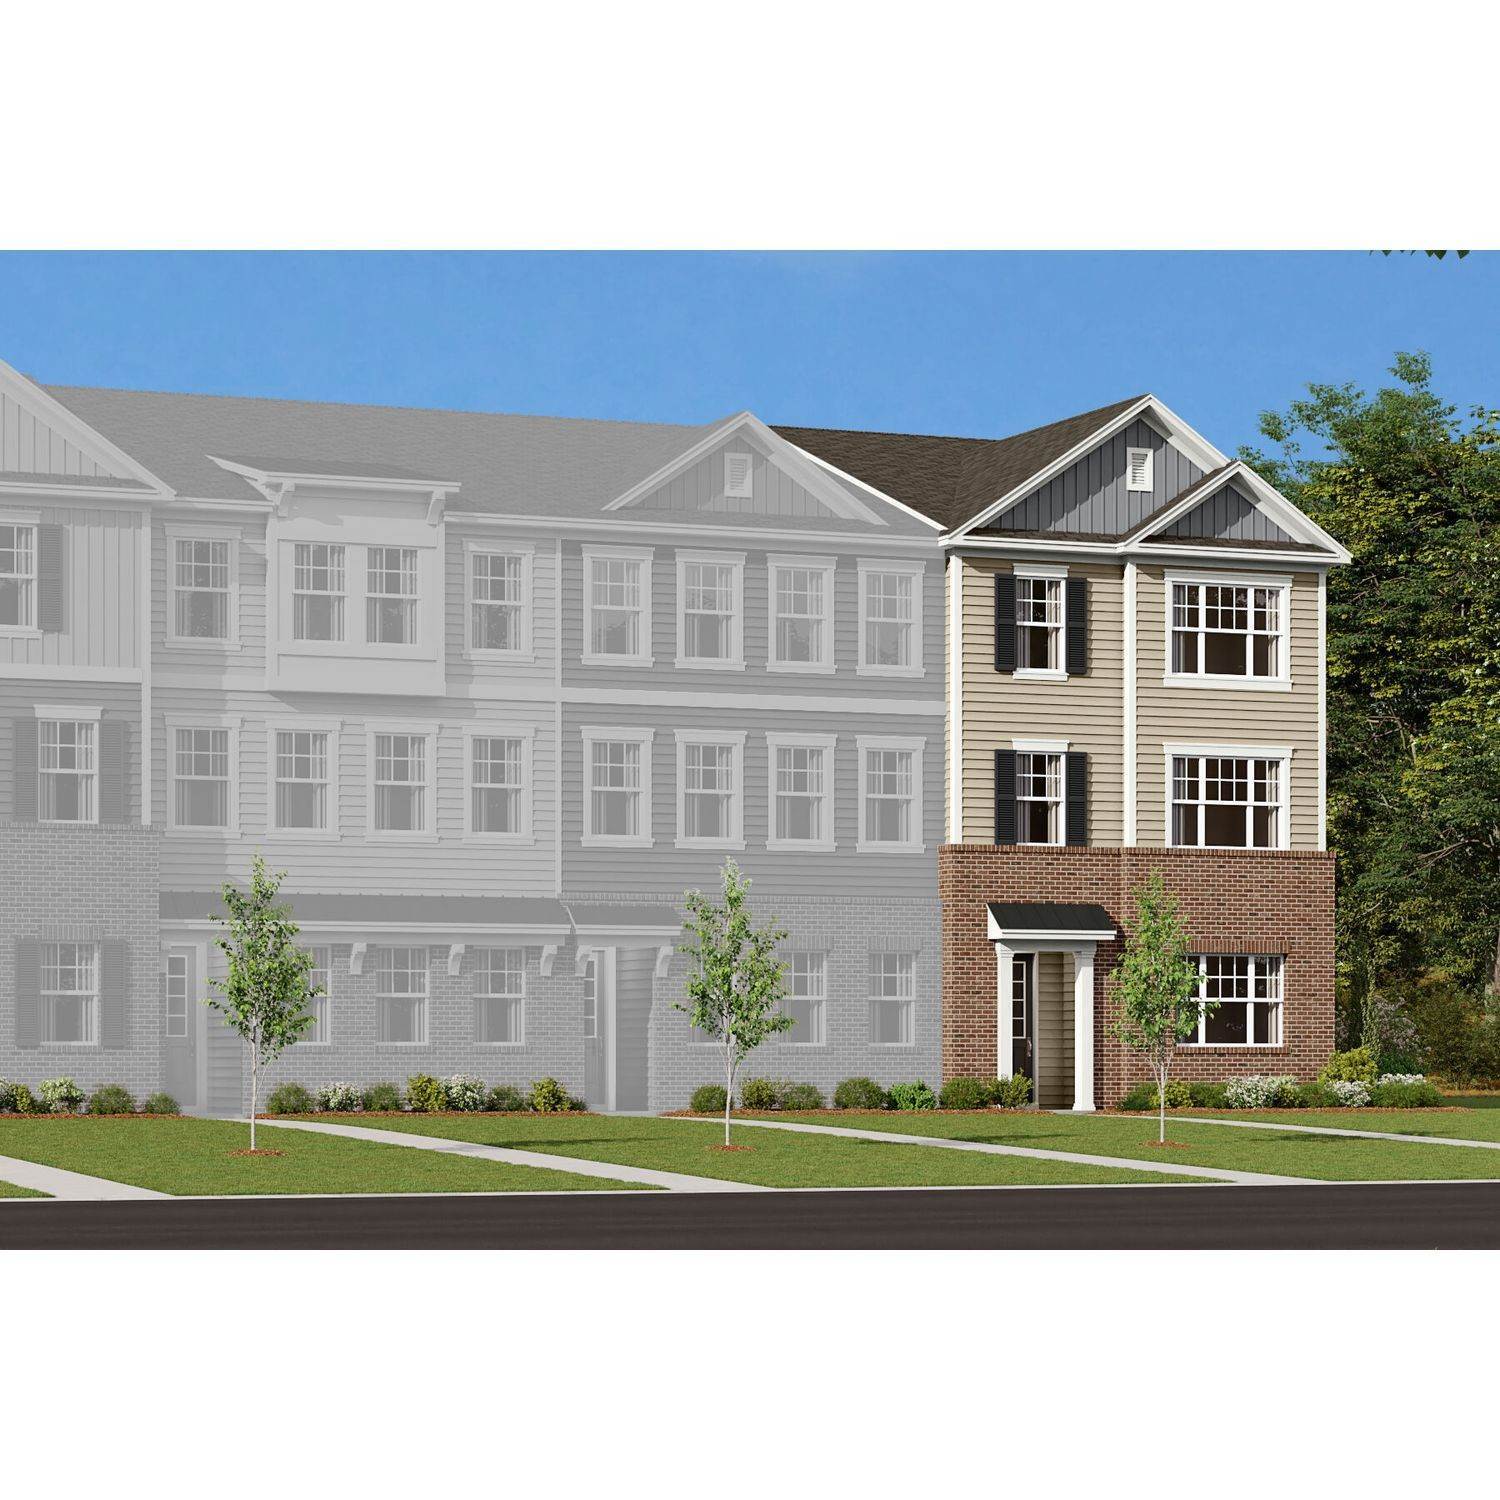 Multi Family for Sale at Indian Trail, NC 28079